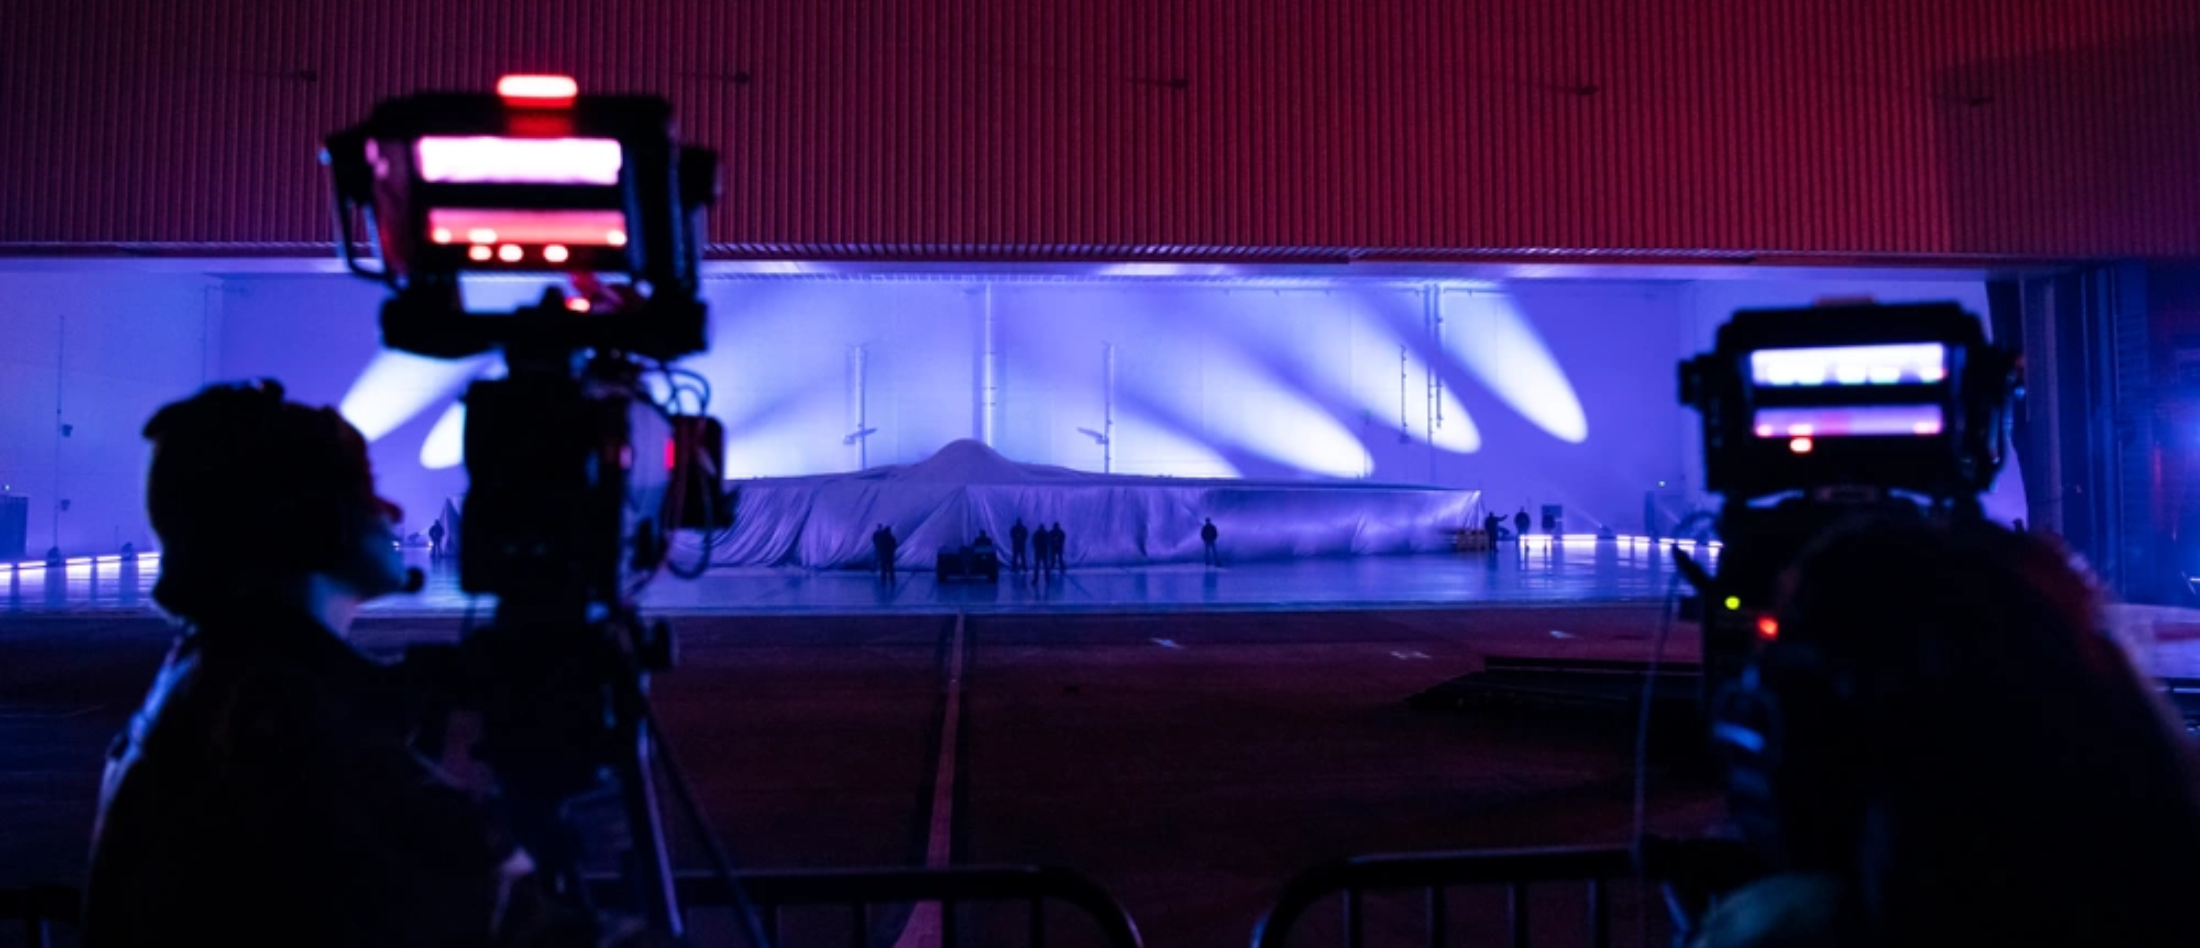 Unveiling of the new U.S. Air Force nuclear stealth bomber, the B-21 Raider, Palmdale, December 2022. Source: Defense Visual Information Distribution Service, photo by Joshua Carroll. 